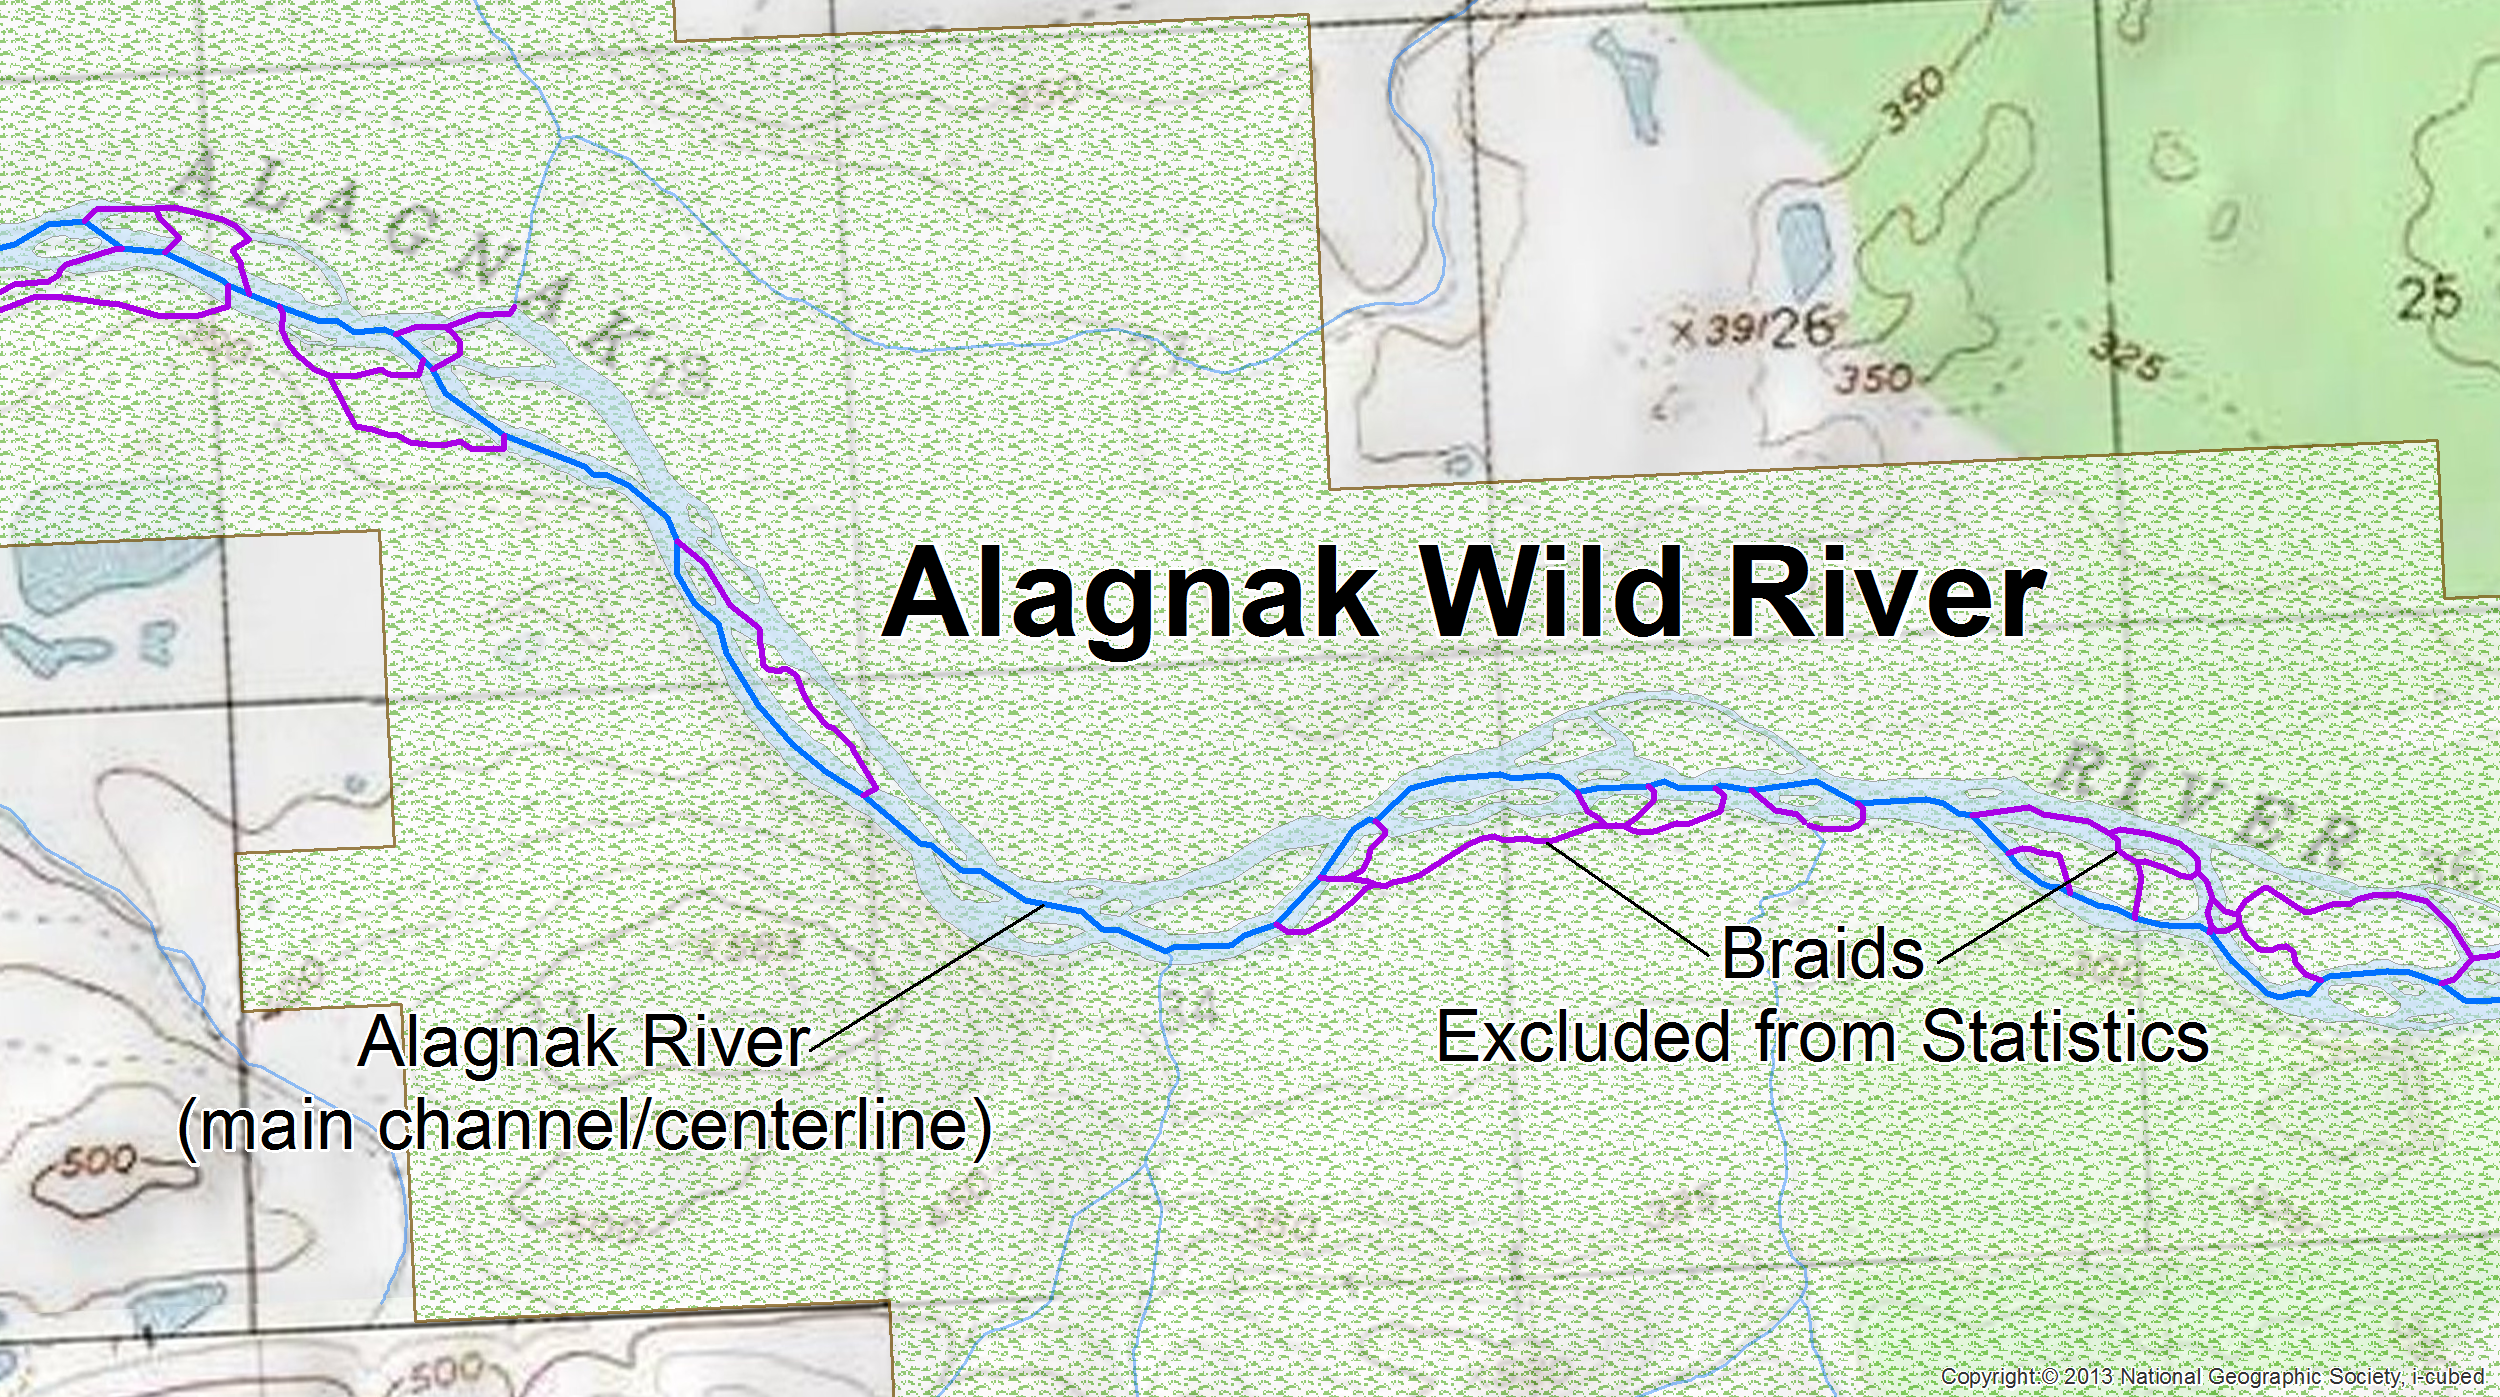 The Alagnak River in Alaska is a complex river system that contains several braids (purple). Only the main channel (blue) of the river system is included in the statistics.